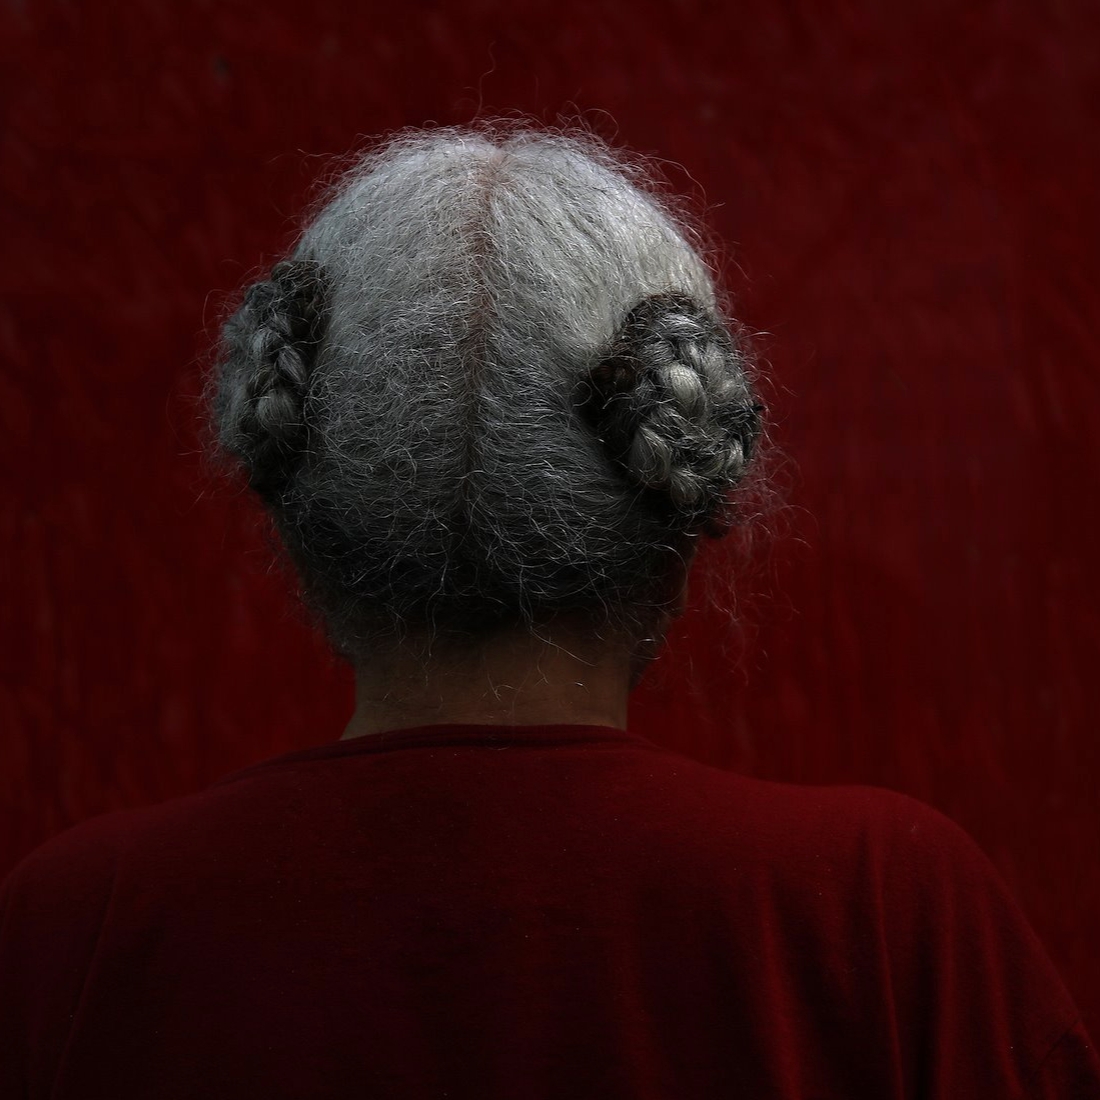 Image of the back of an older woman with grey hair pulled into two buns standing in front of a red wall. 